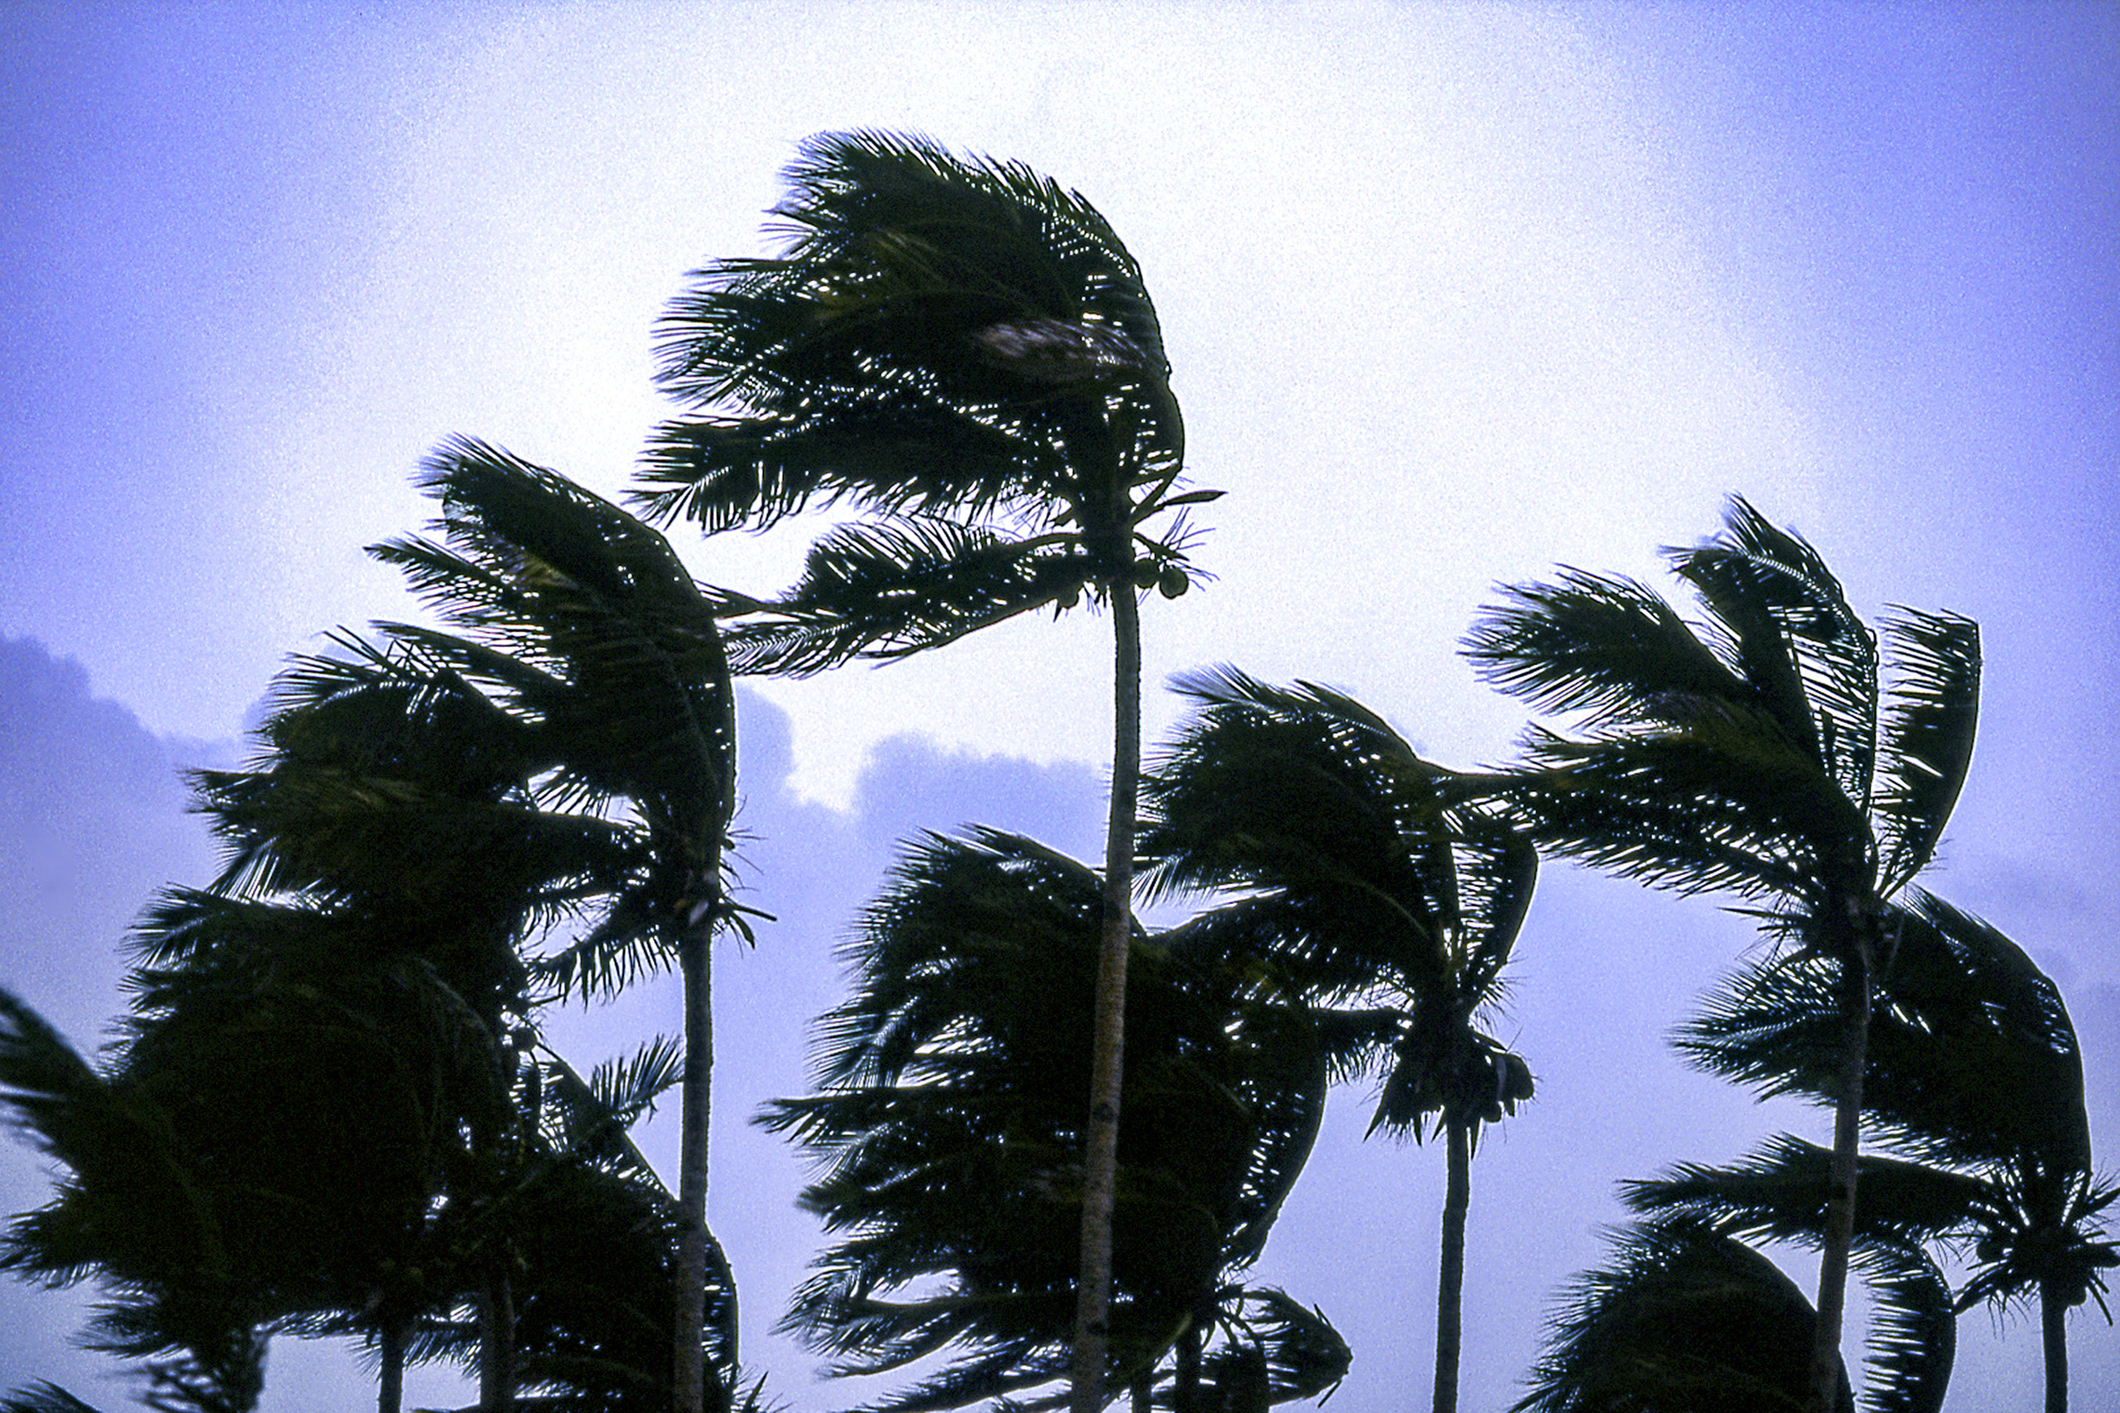 A photo of palm trees bending in Category 1 gale winds on the island of Boracay in the Philippines